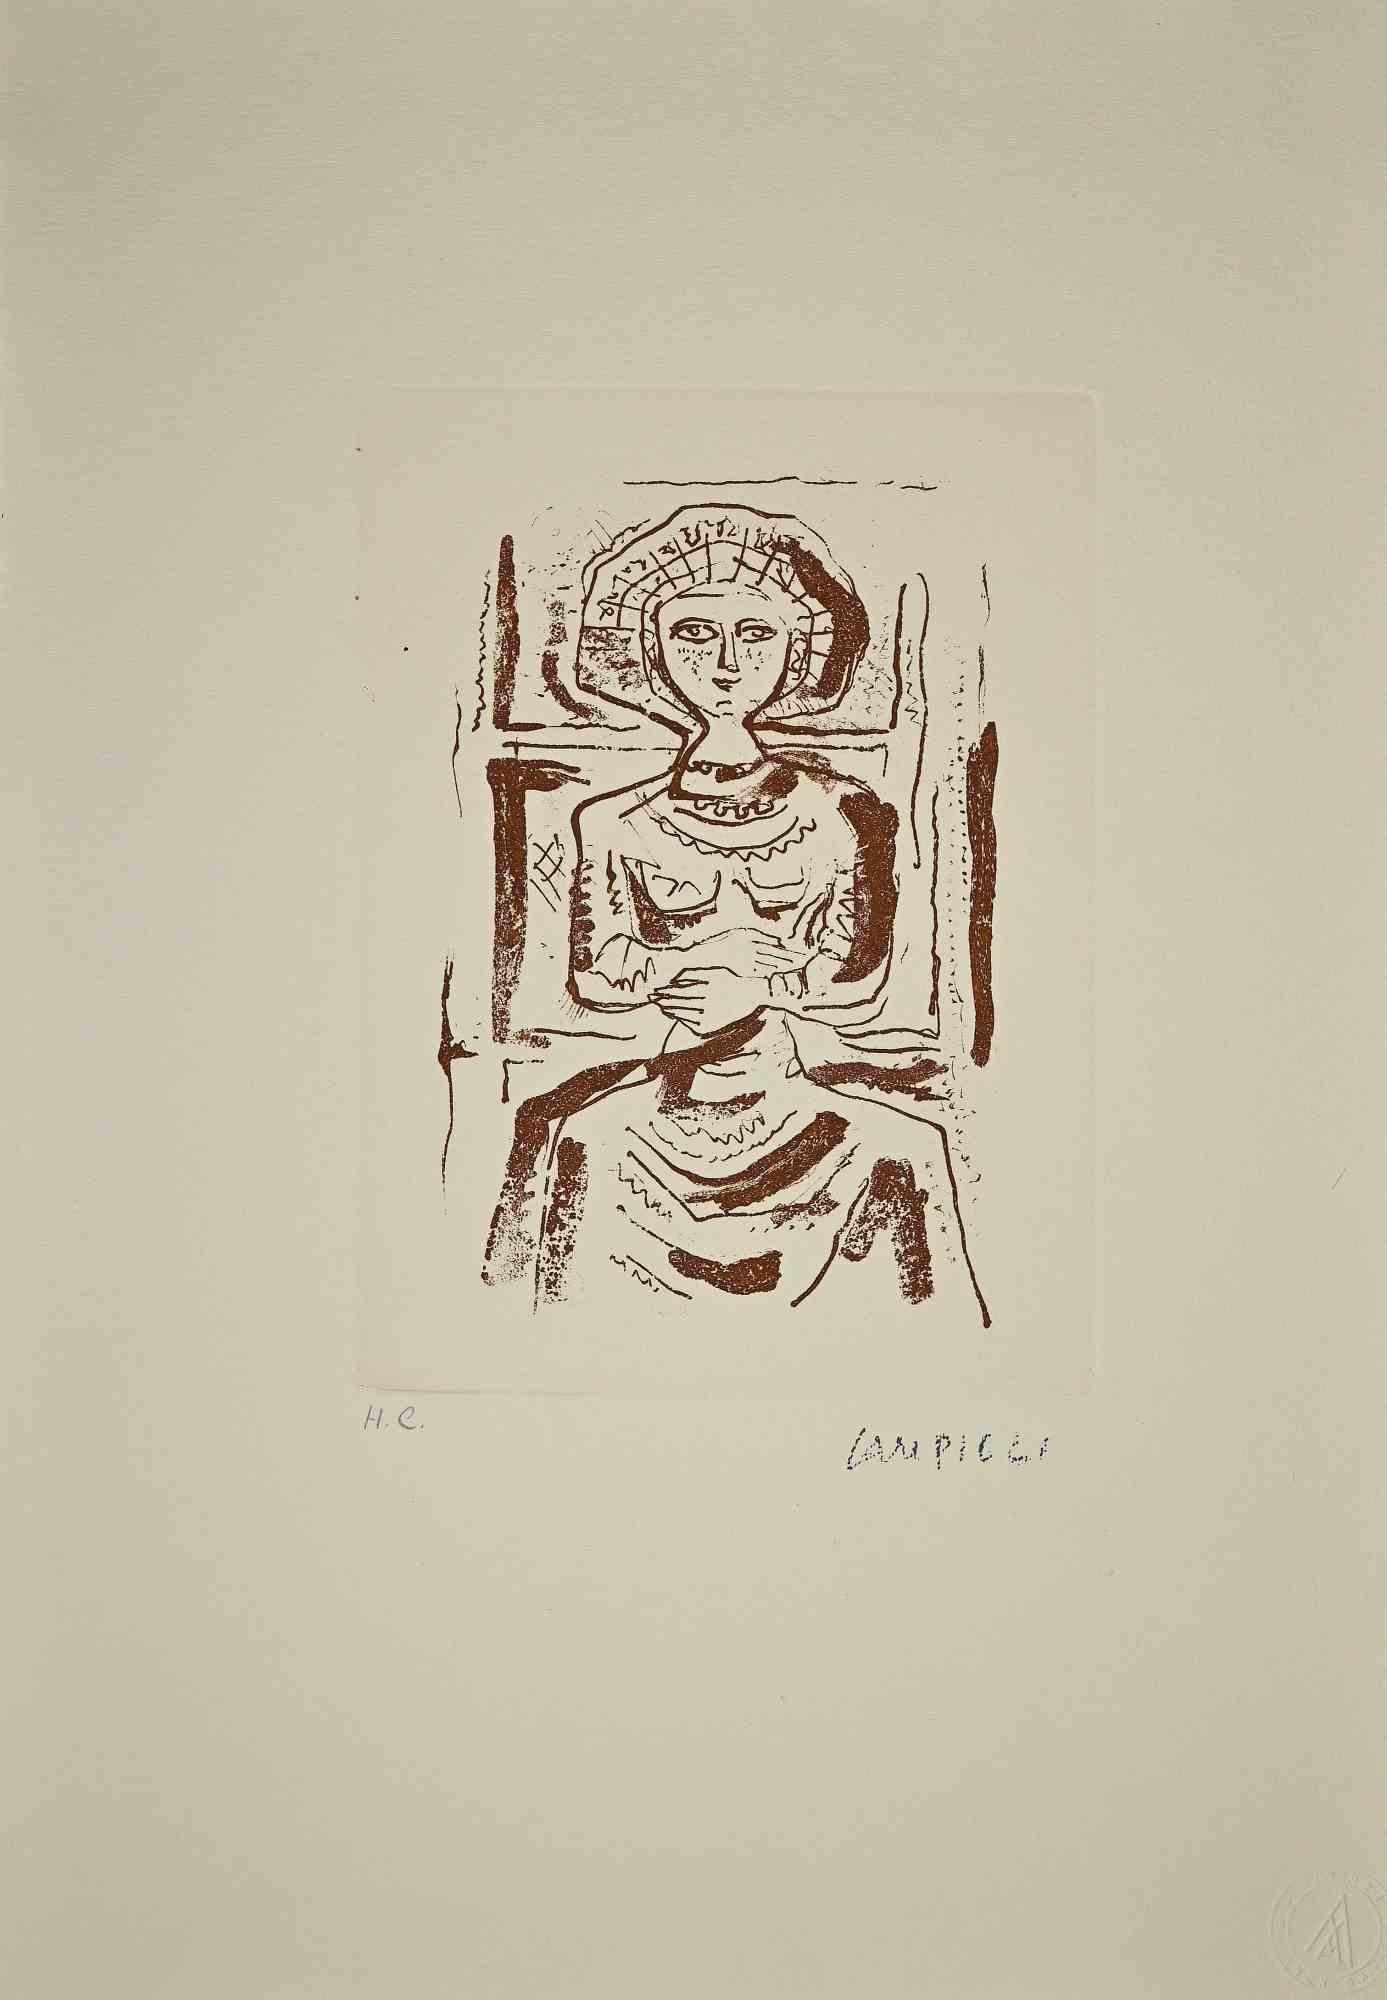 The Idol is an original print realized by Massimo Campigli in the 1970/1971.

Etching on paper..

This artwork it is part of a series of works created in the last period of the artist and printed at the turn of the year of his death, which took